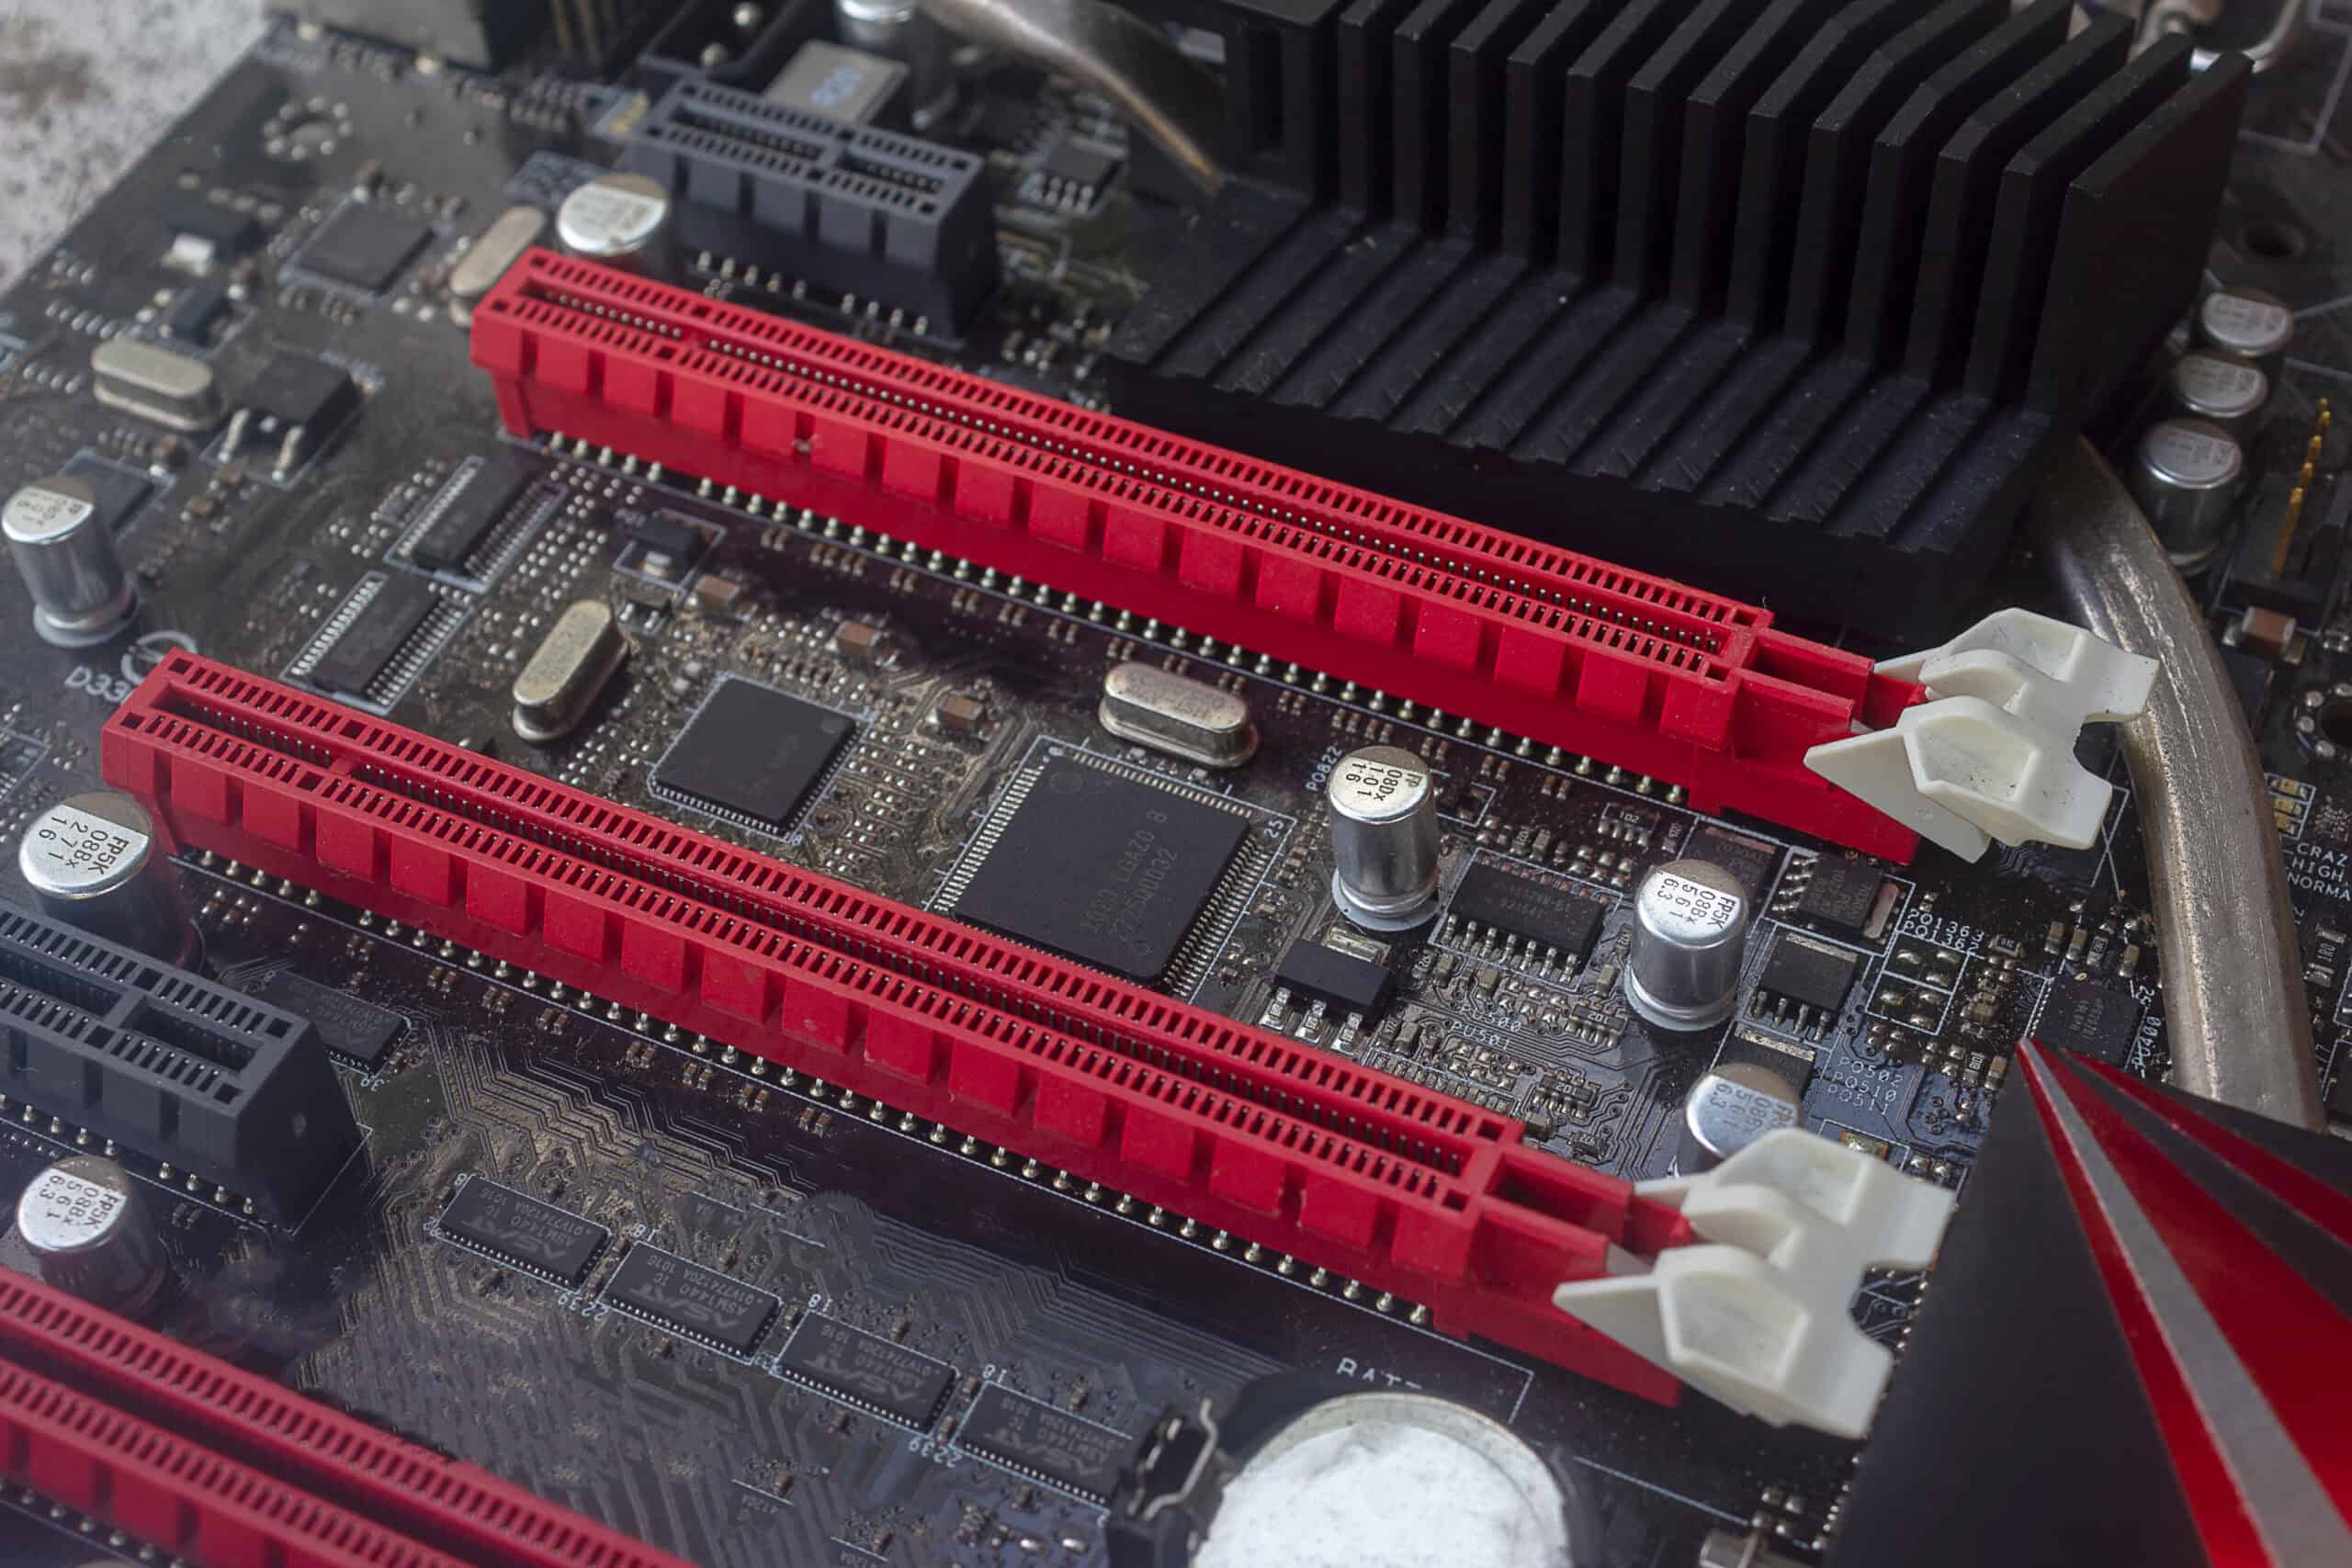 The Pci Express slot red color for video graphic card VGA card on computer motherboard